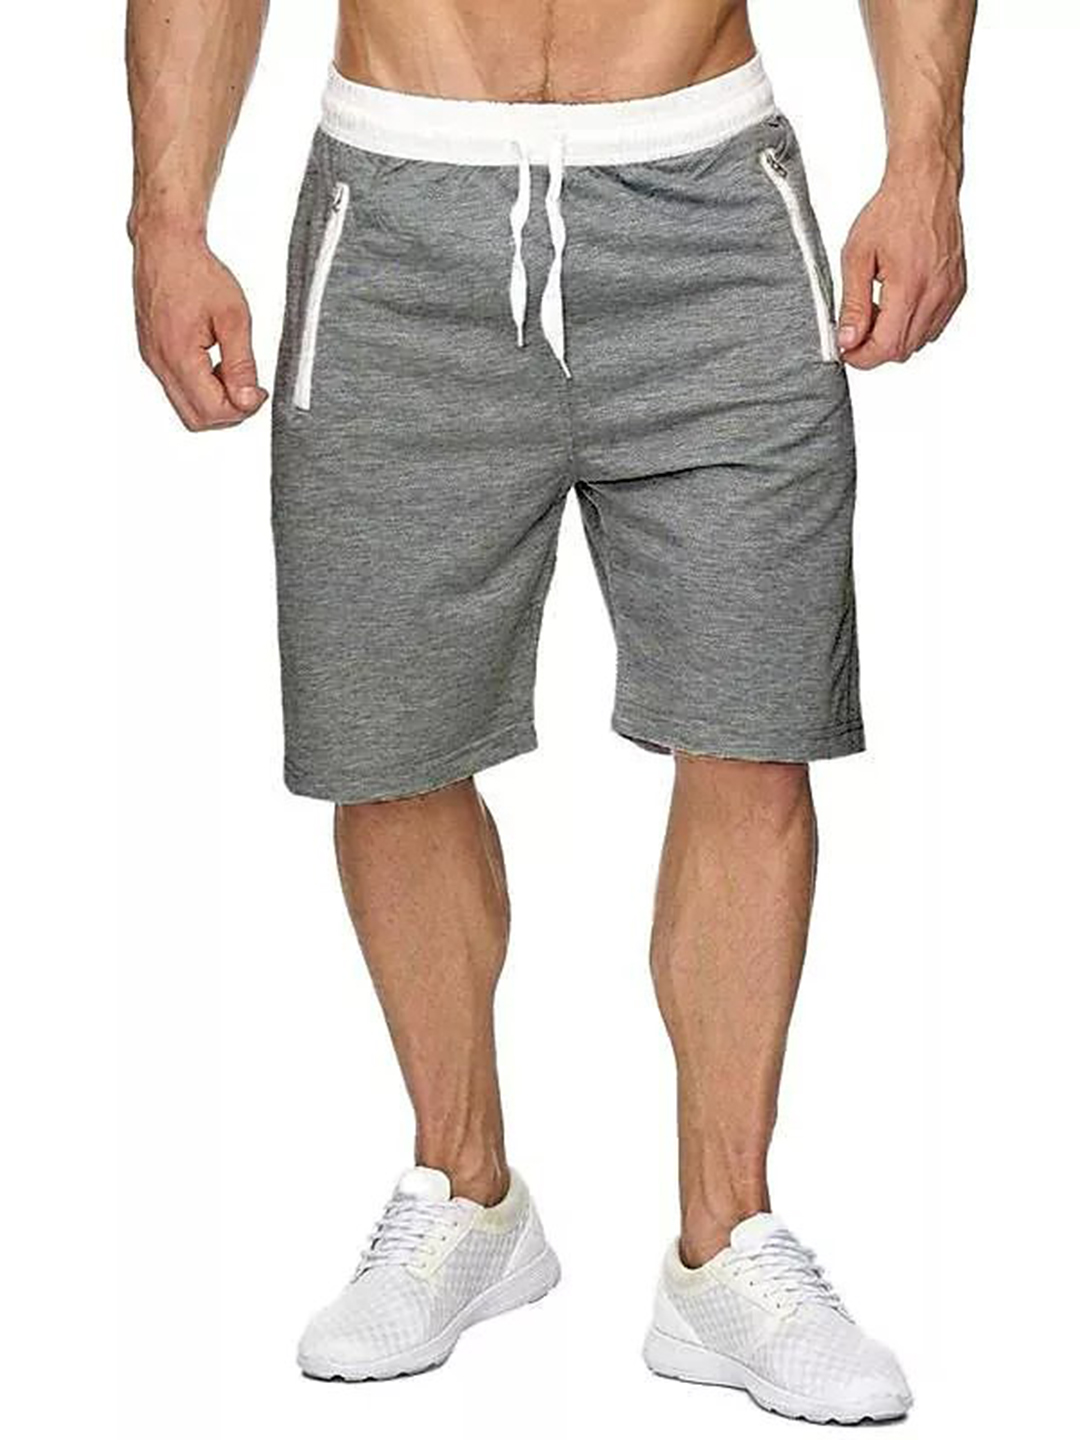 Men's Sports Fitness Casual Shorts 